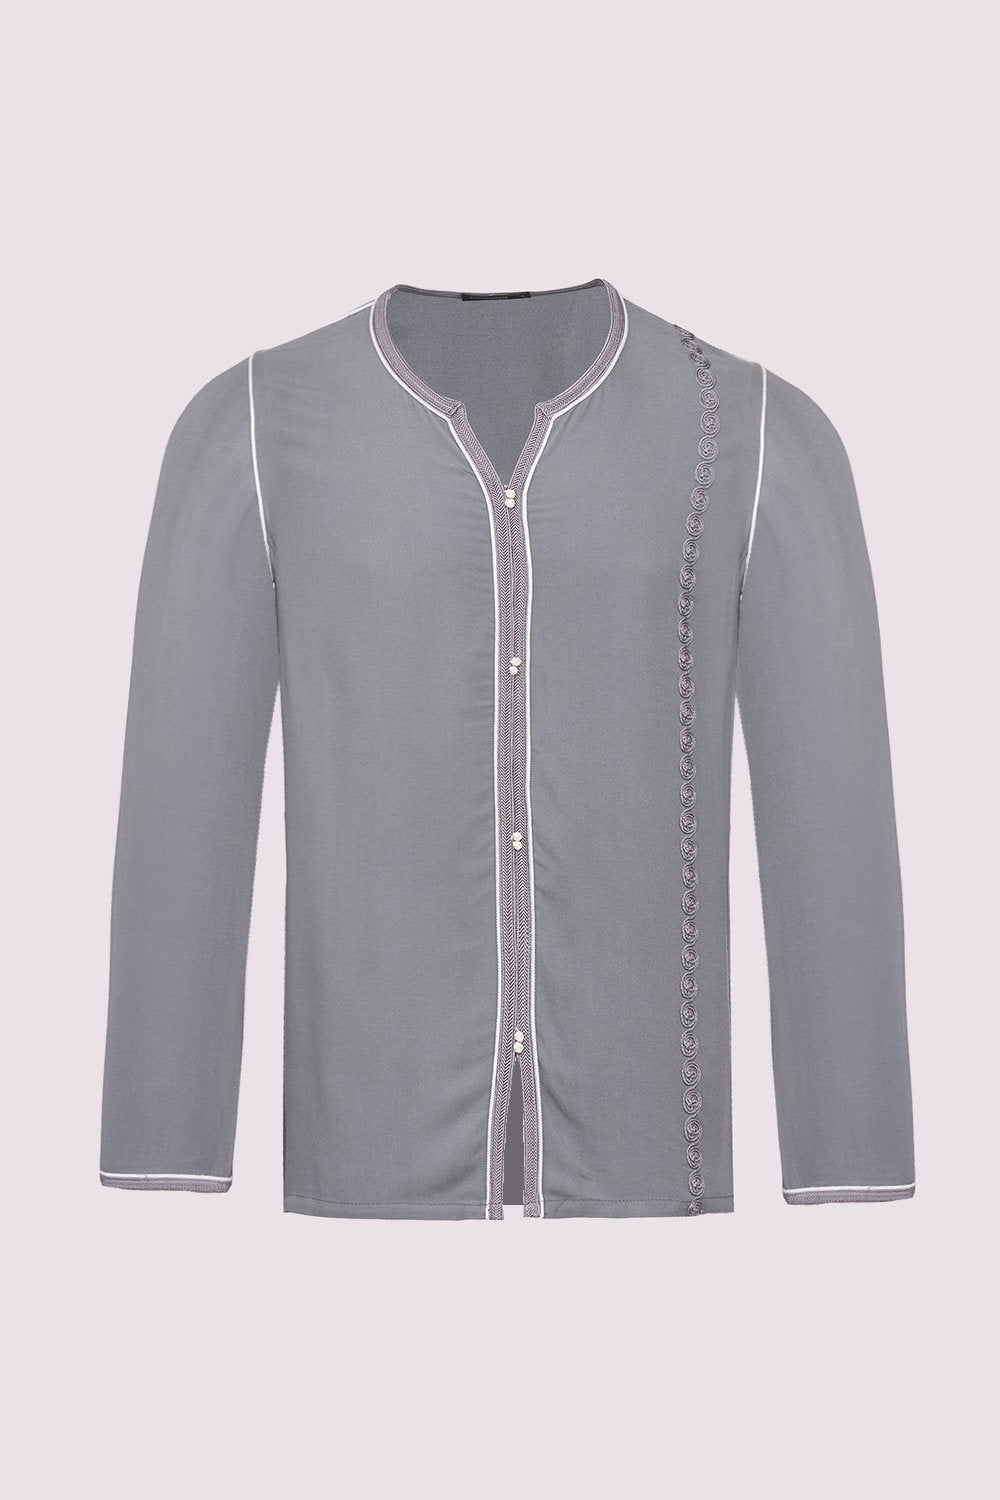 Houssni Embroidered Collarless Men's Button-Up Shirt in Grey